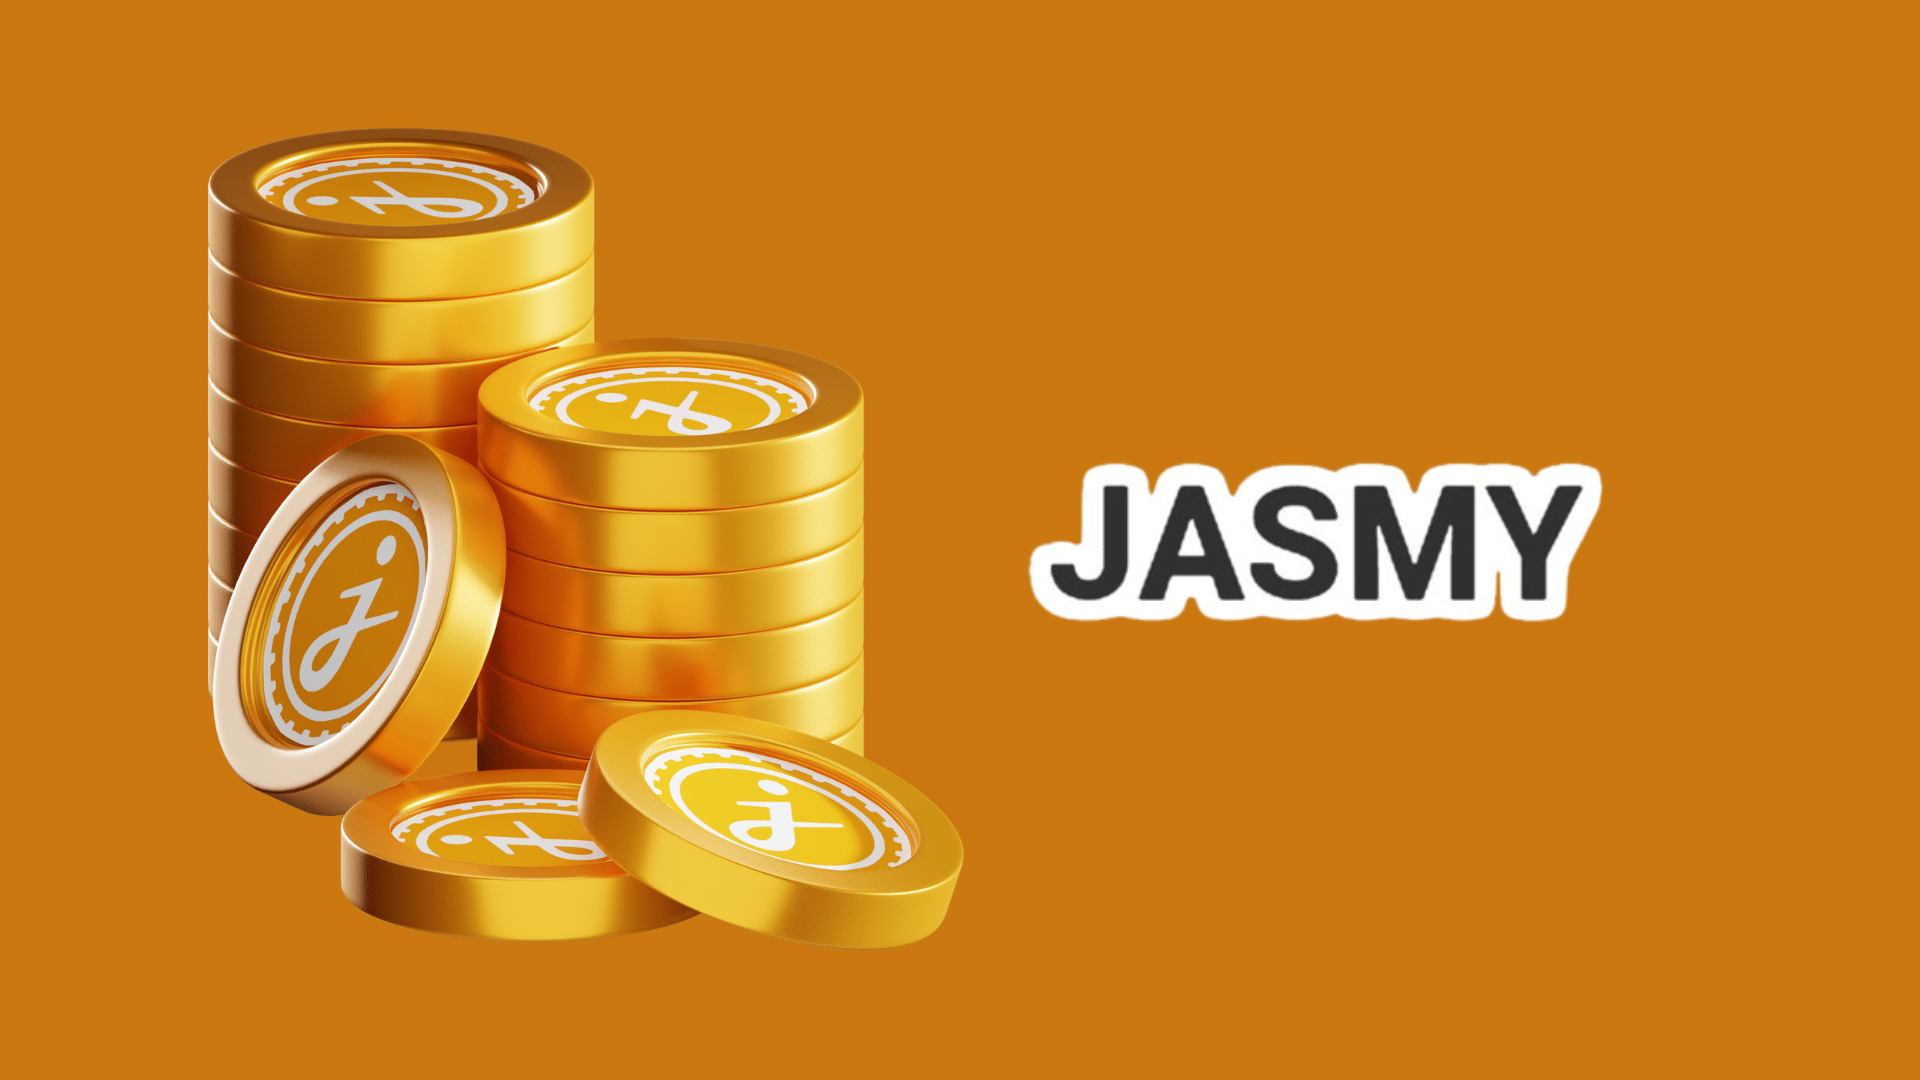 JasmyCoin Price Prediction: JASMY Is Top Monthly Gainer Ahead Of PEPE And WIF With 335% Pump, But Traders Turn To This New AI Crypto That’s Blasted Past $1 Million